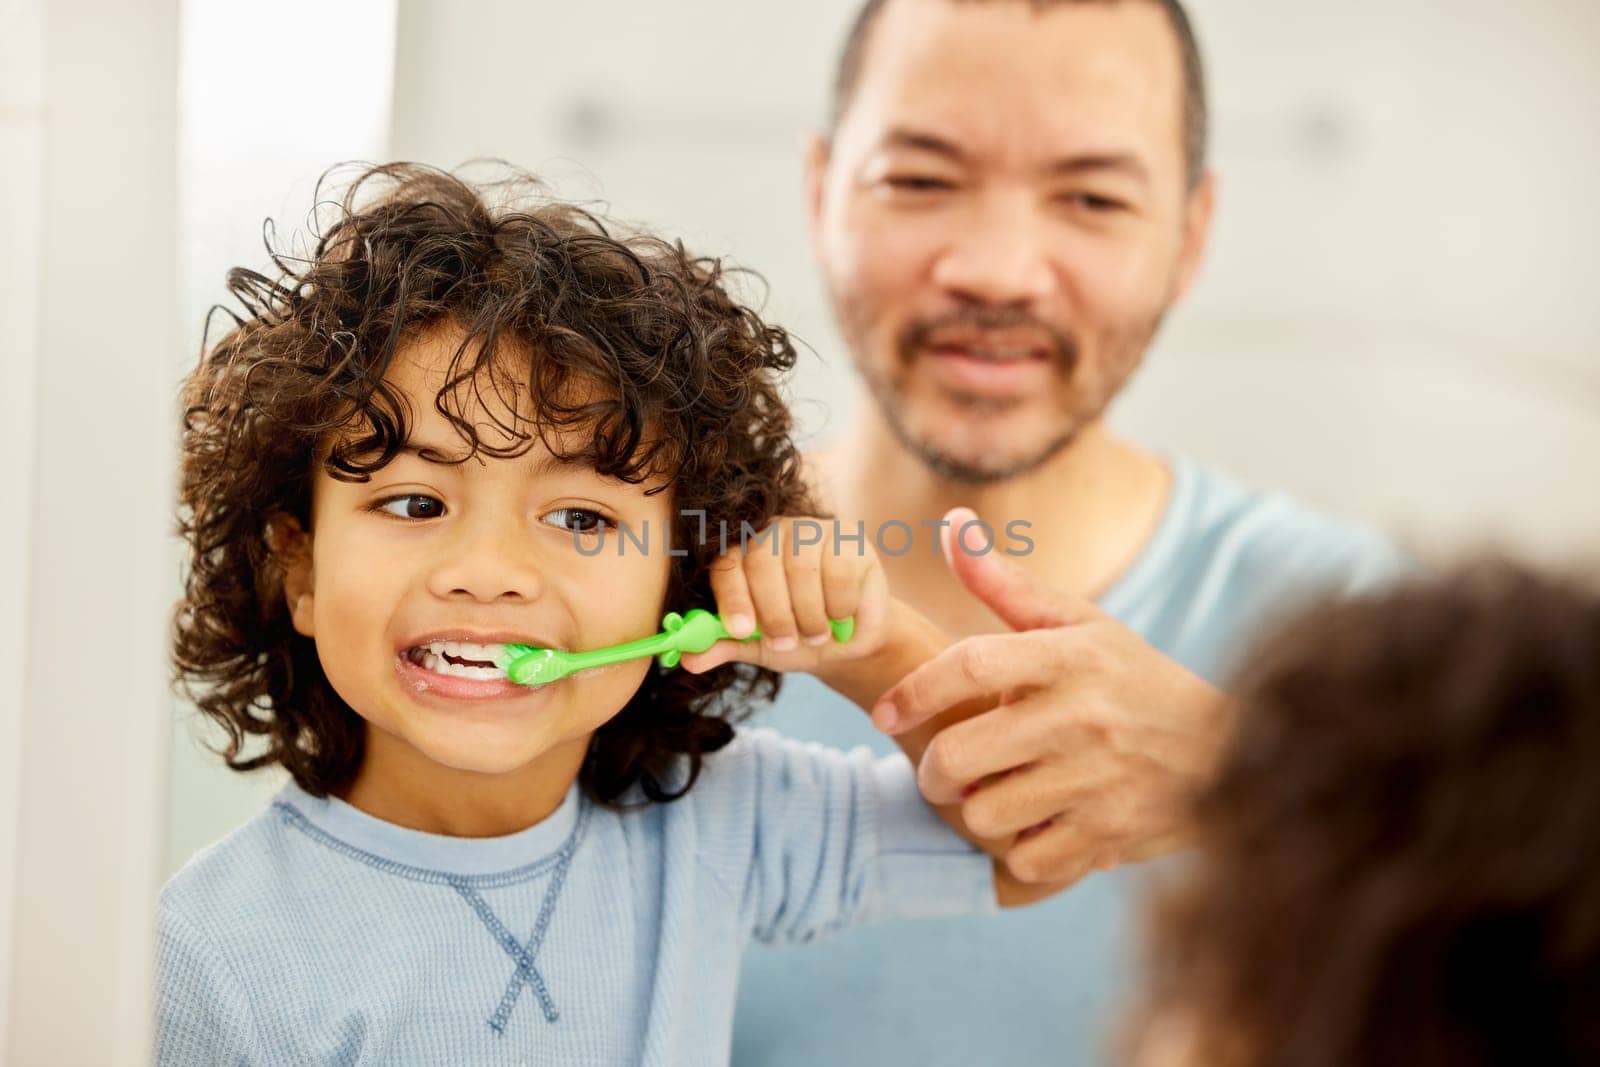 Child, brushing teeth and father learning in a bathroom with dental health and cleaning. Morning routine, toothbrush and kid with dad together showing hygiene care at a mirror at home with grooming.